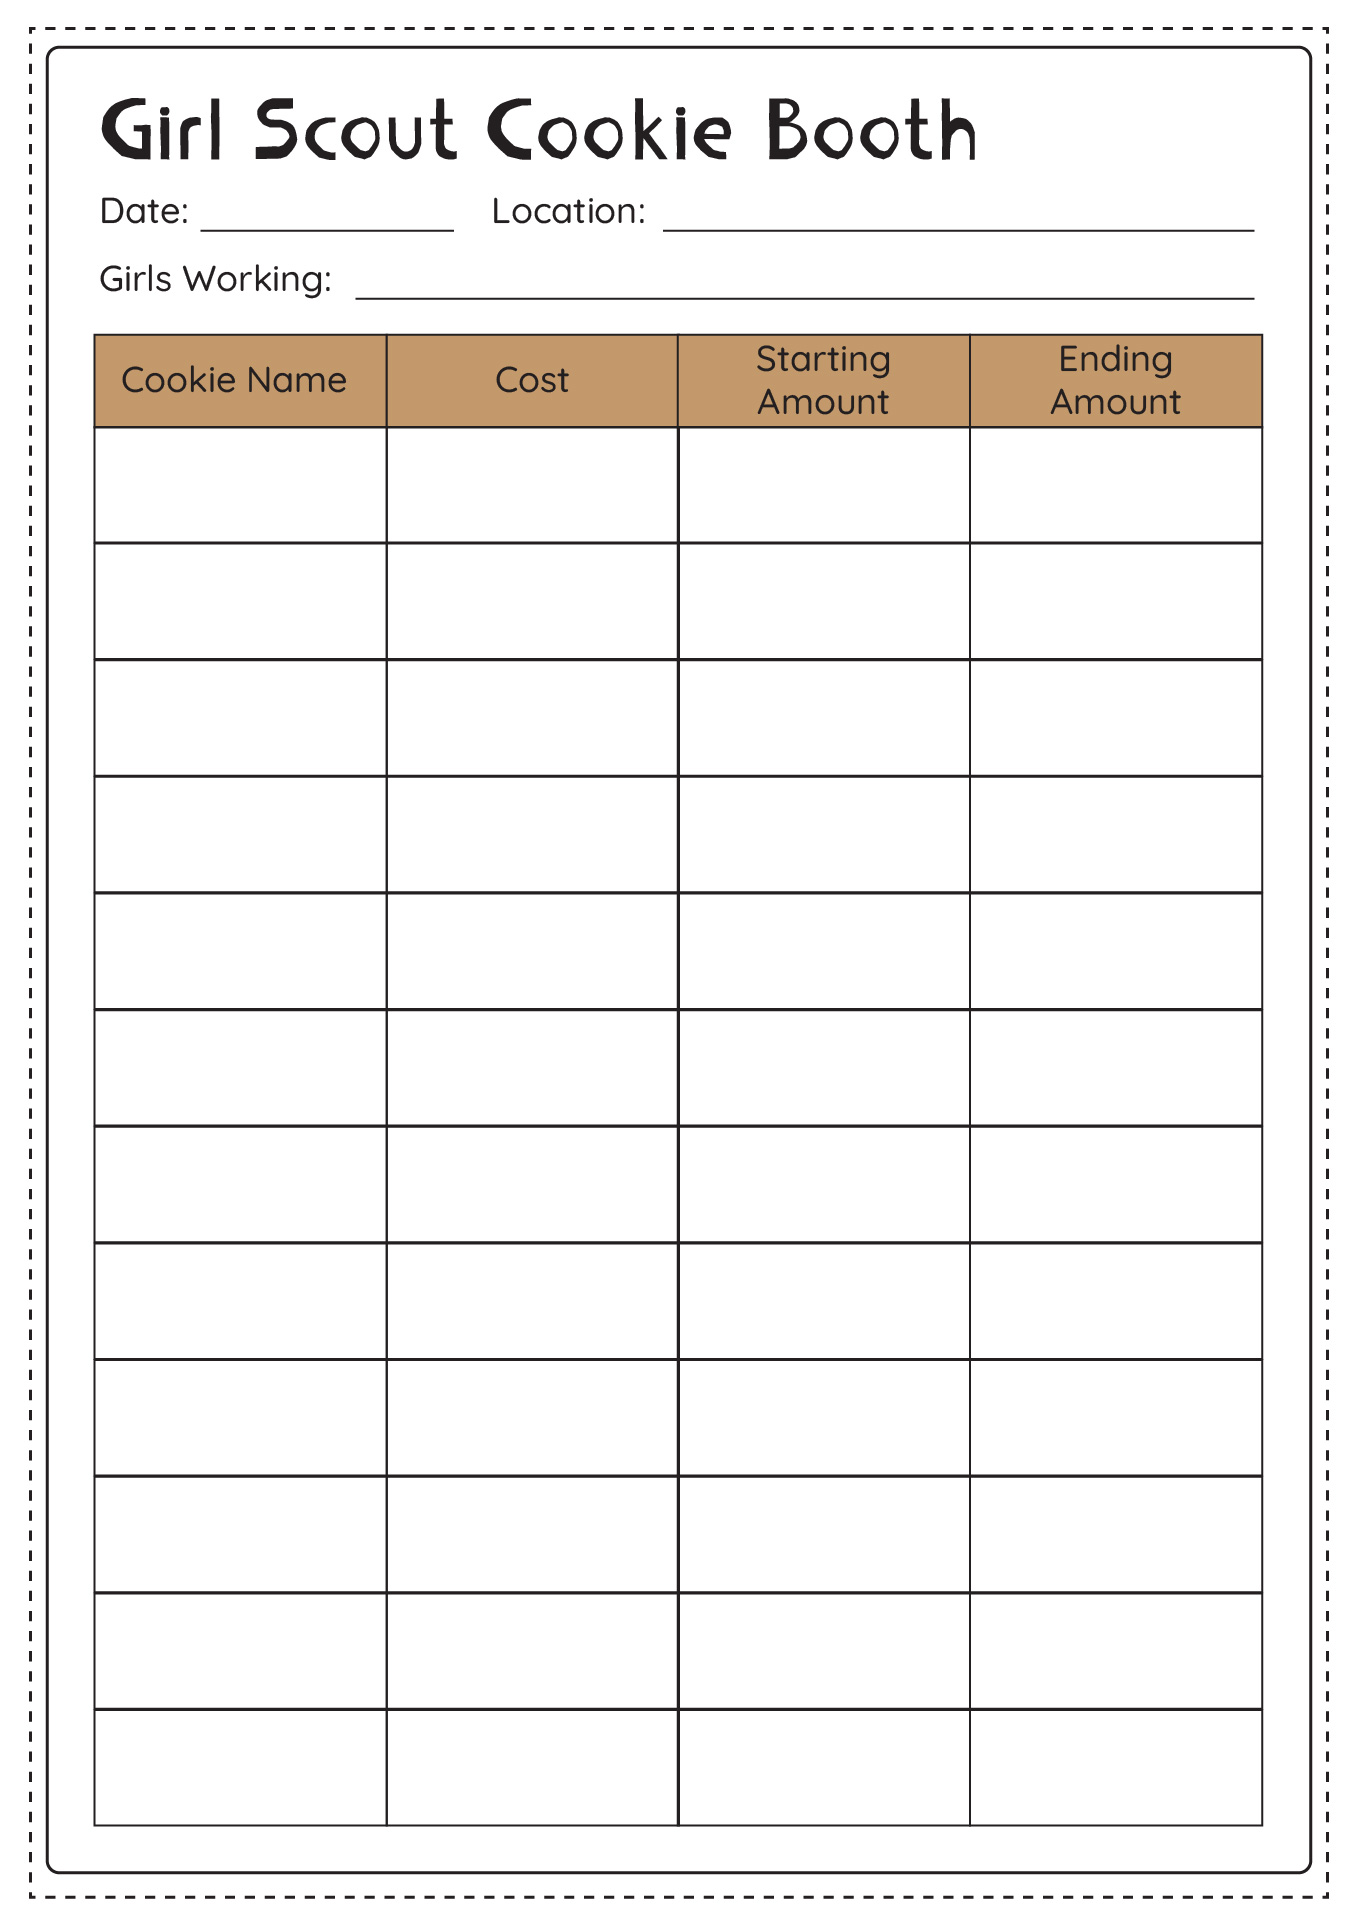 Girl Scout Cookie Booth Tally Sheet